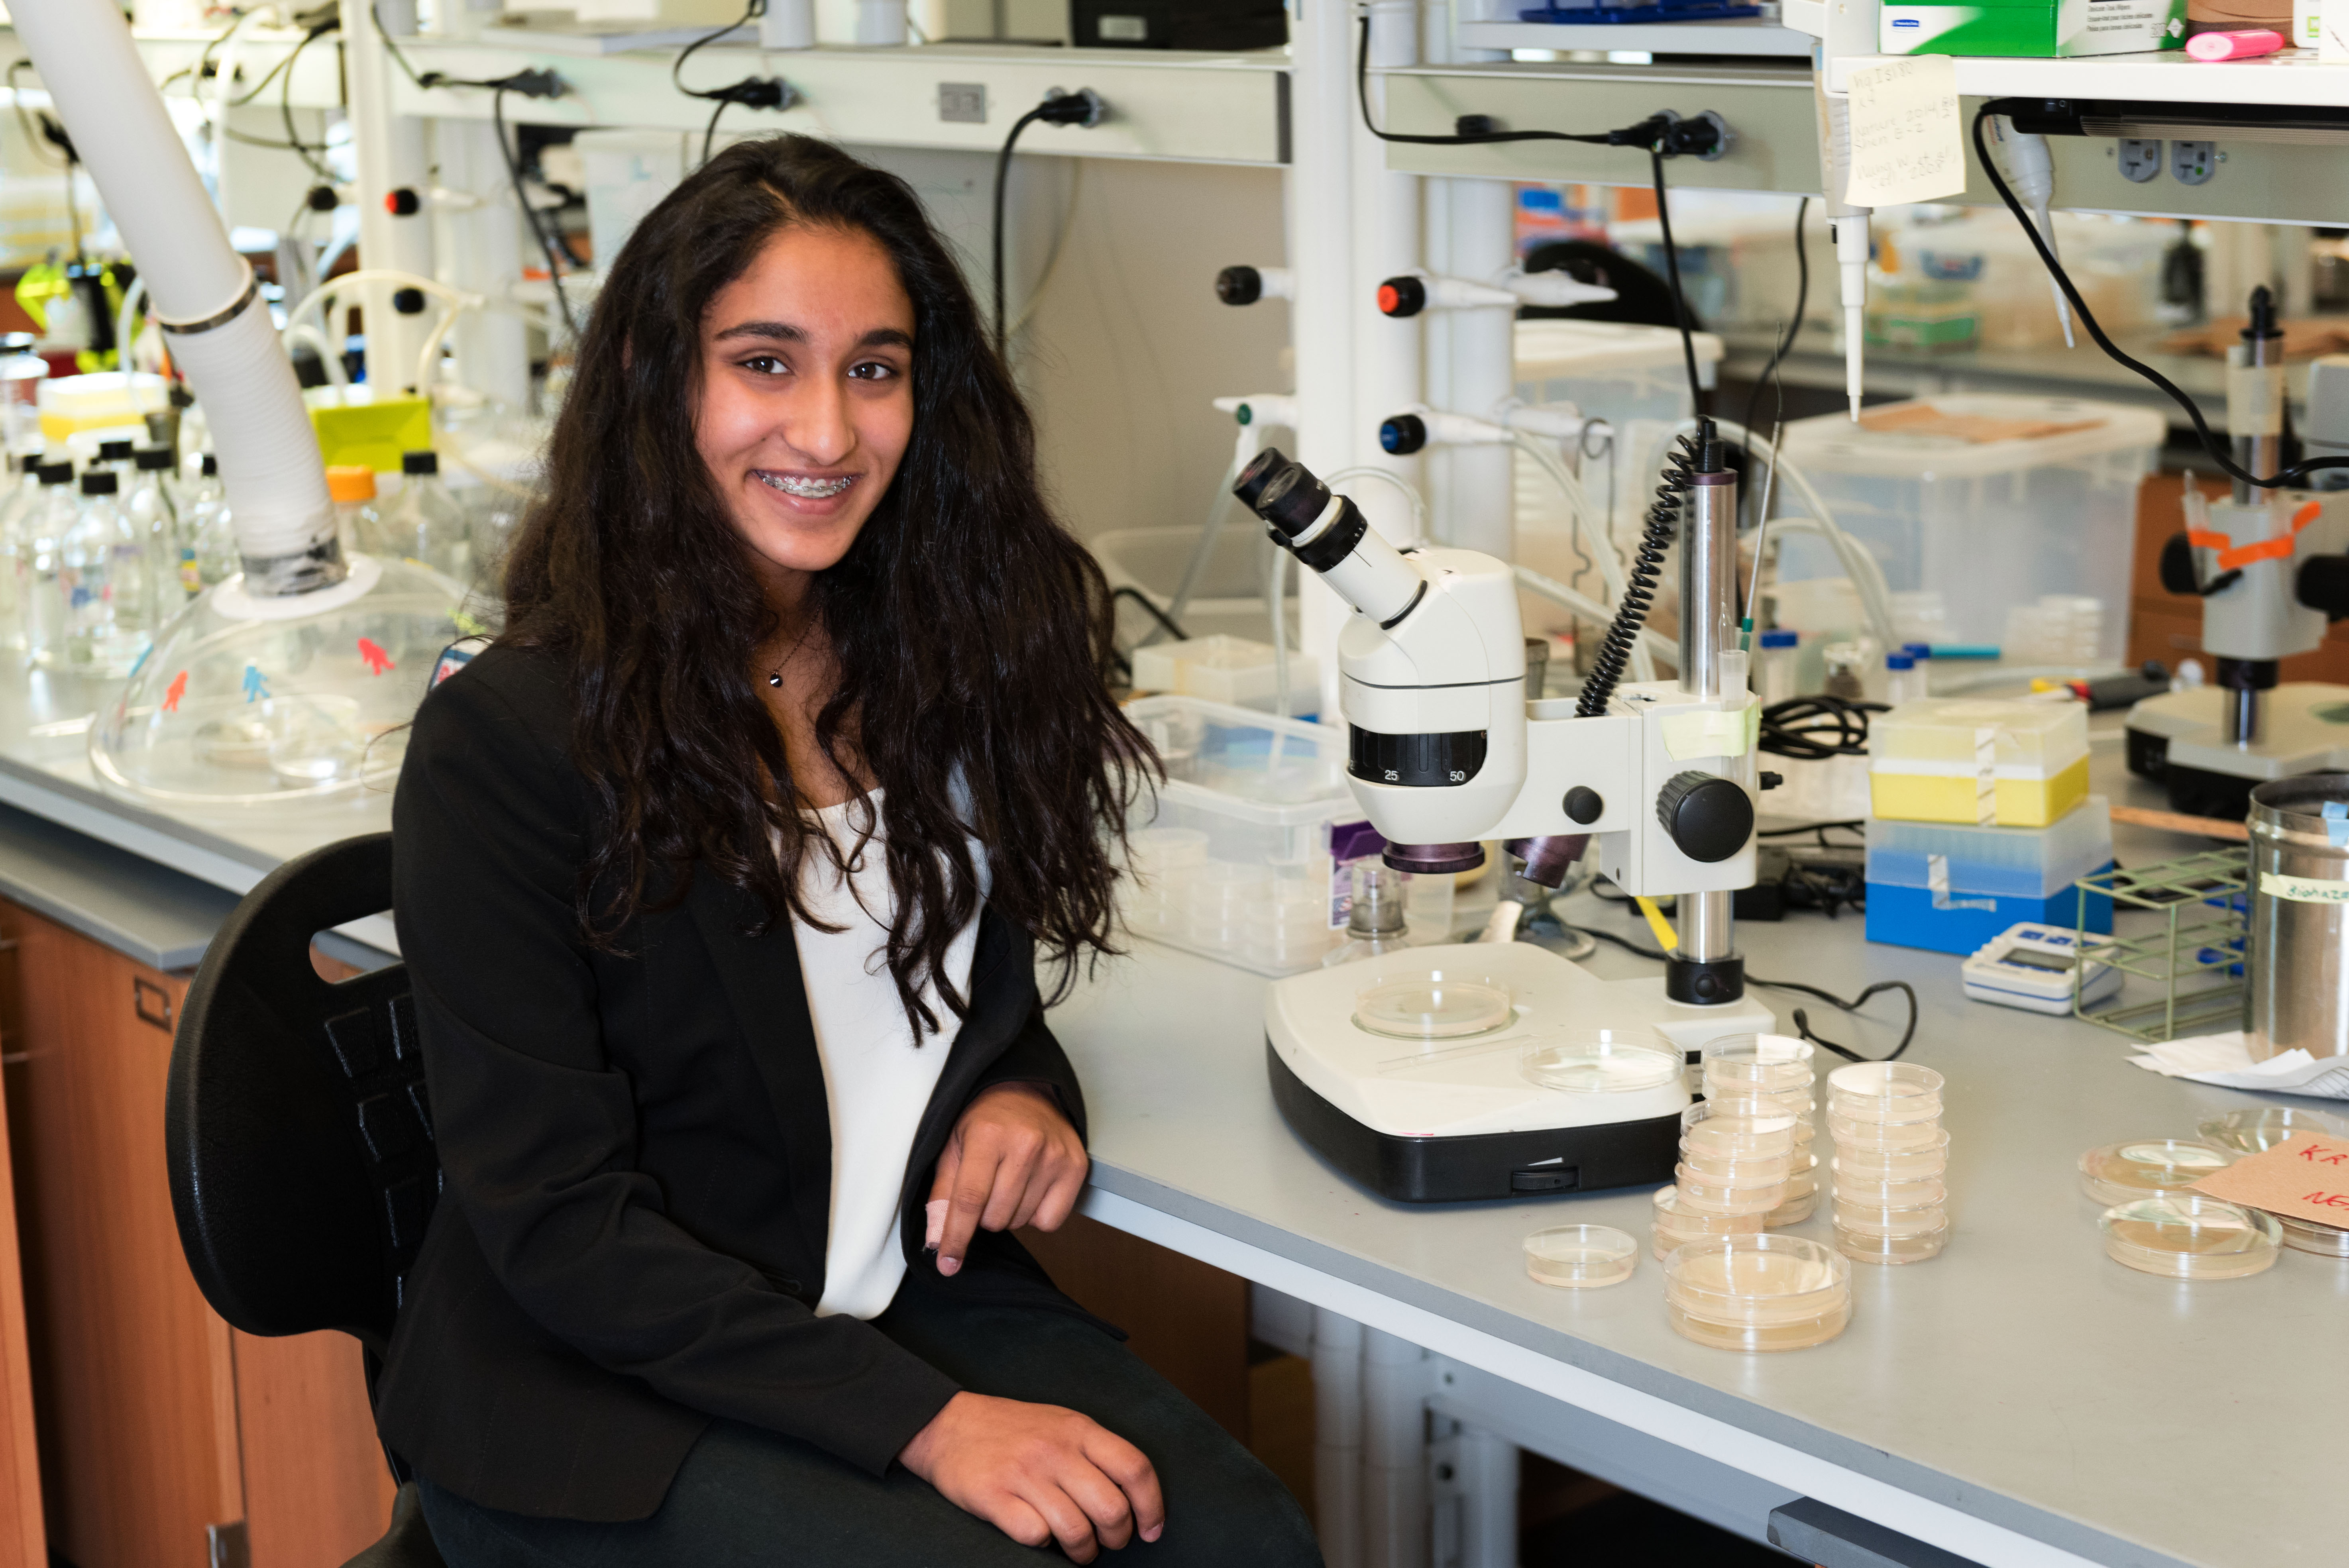 Mira Patel, who just finished her sophomore year at McKinney High School, is one of six newly admitted Texas Academy of Mathematics and Science students spending the summer doing research in University of North Texas science laboratories.